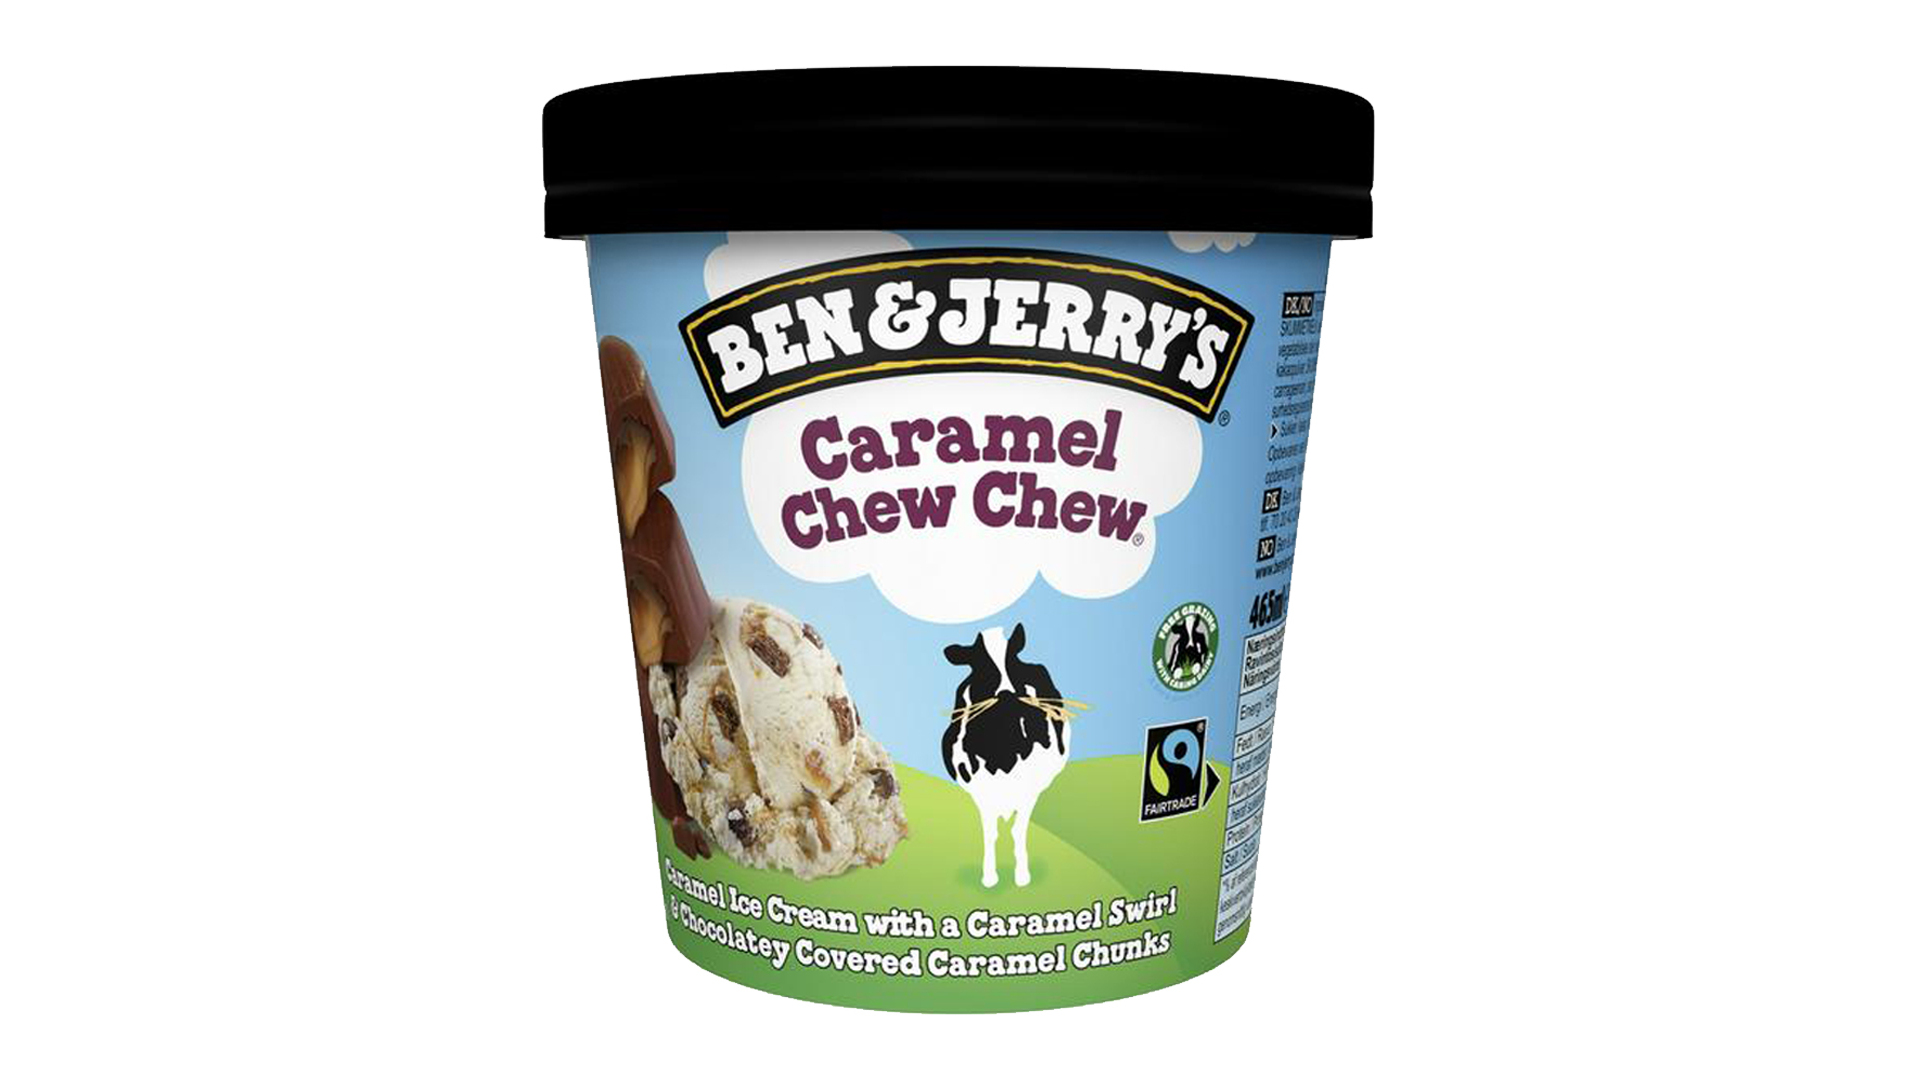 Ben & Jerry's Caramel Chew Chew 500ml - Chicken Burger Delivery in Fullwell Cross IG6